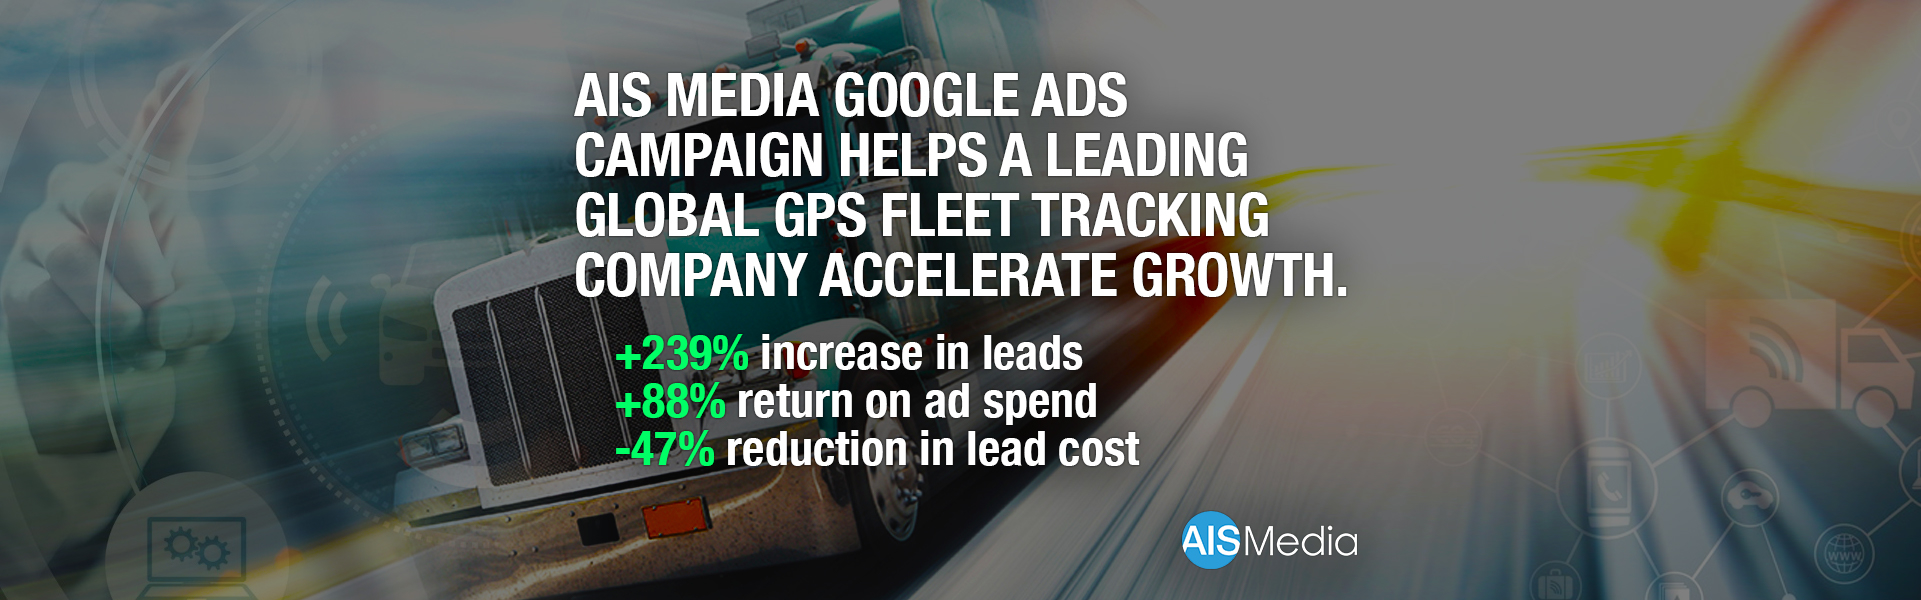 AIS Media Google Ads paid search helps a leading global GPS fleet tracking company accelerate growth